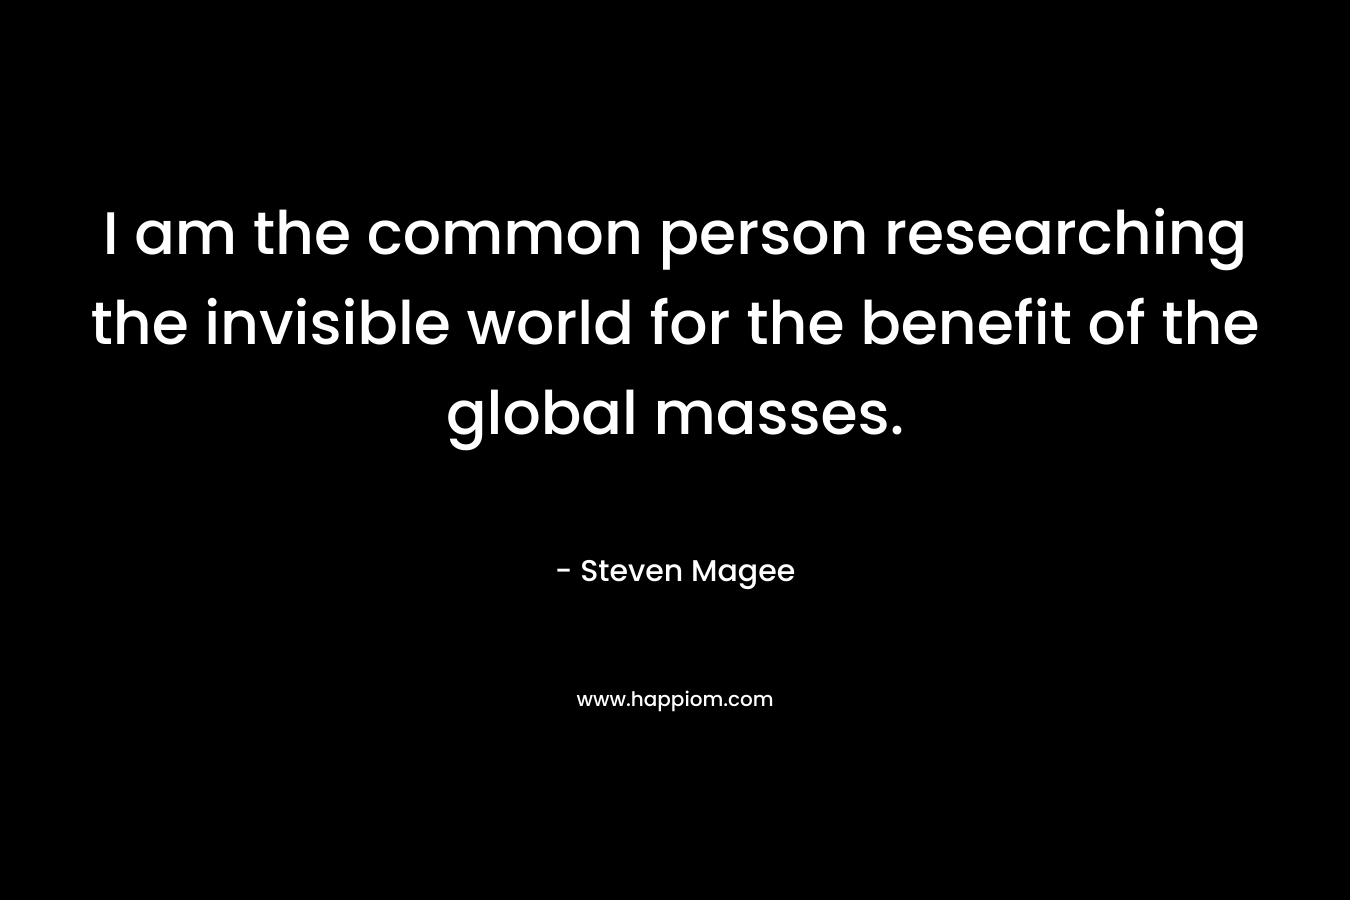 I am the common person researching the invisible world for the benefit of the global masses.